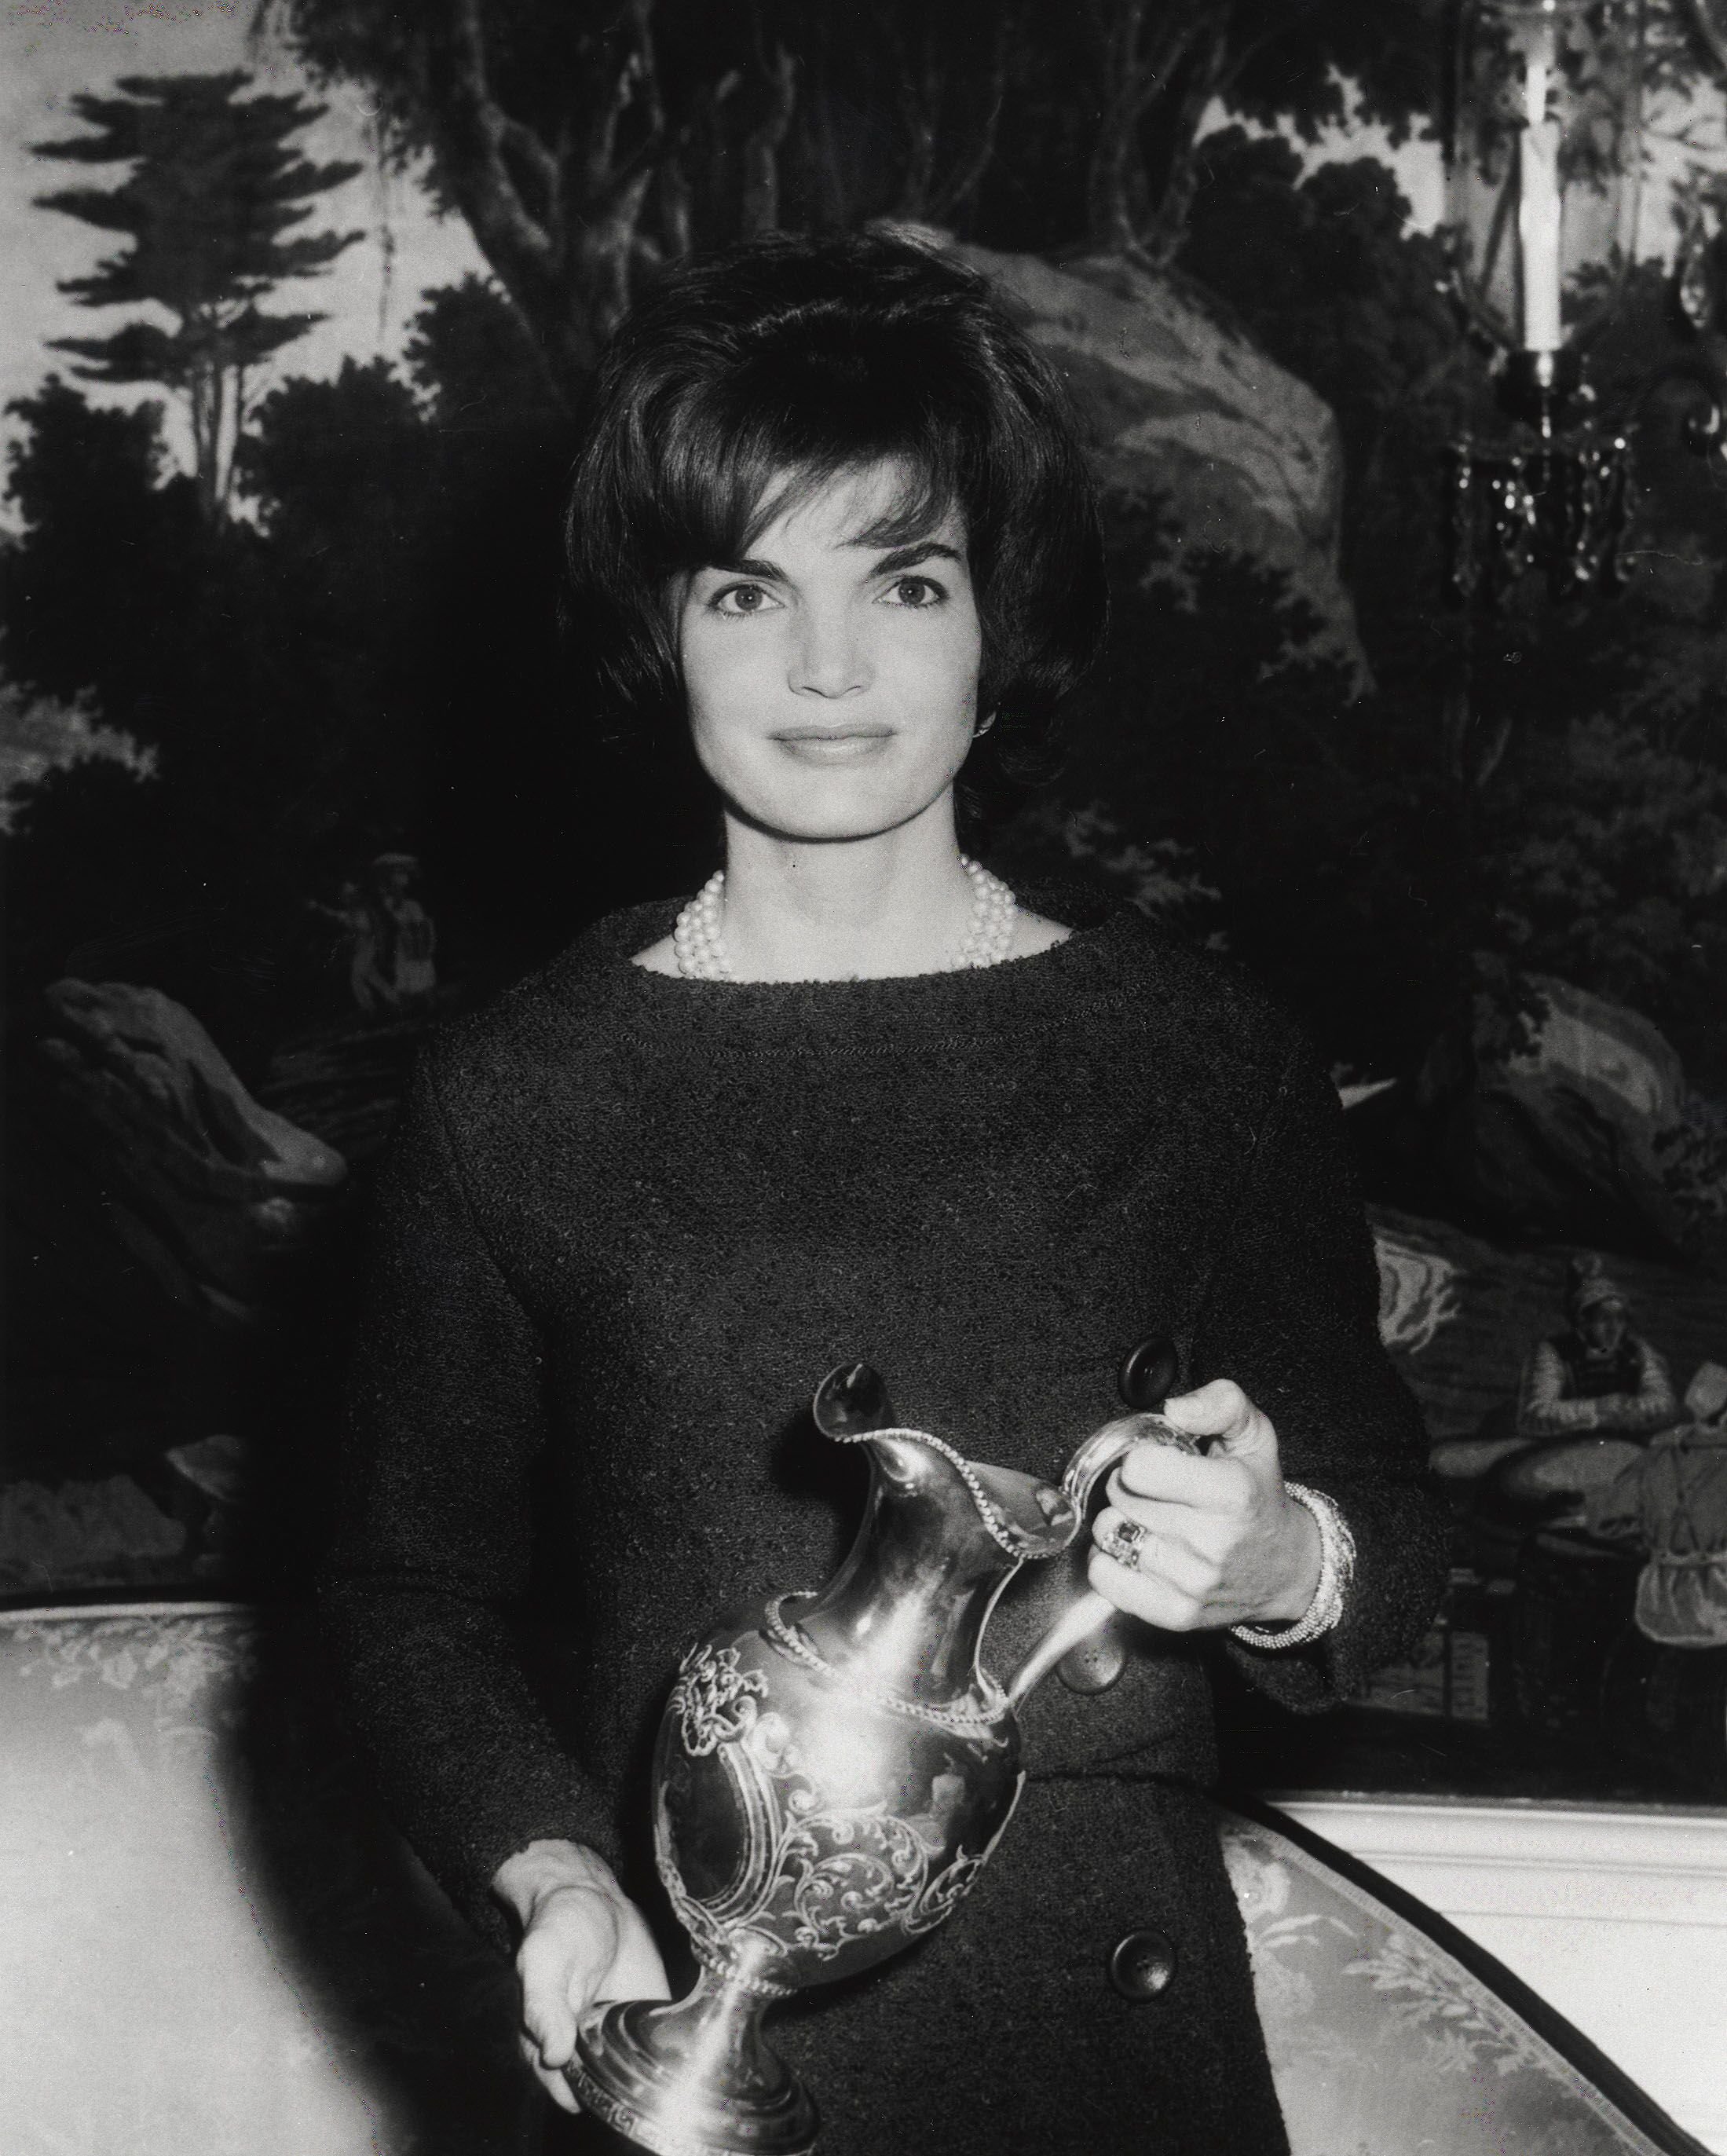 Jacqueline Kennedy poses for a photograph while holding a gift December 12, 1961 at the White House in Washington D.C. | Source: Getty Images